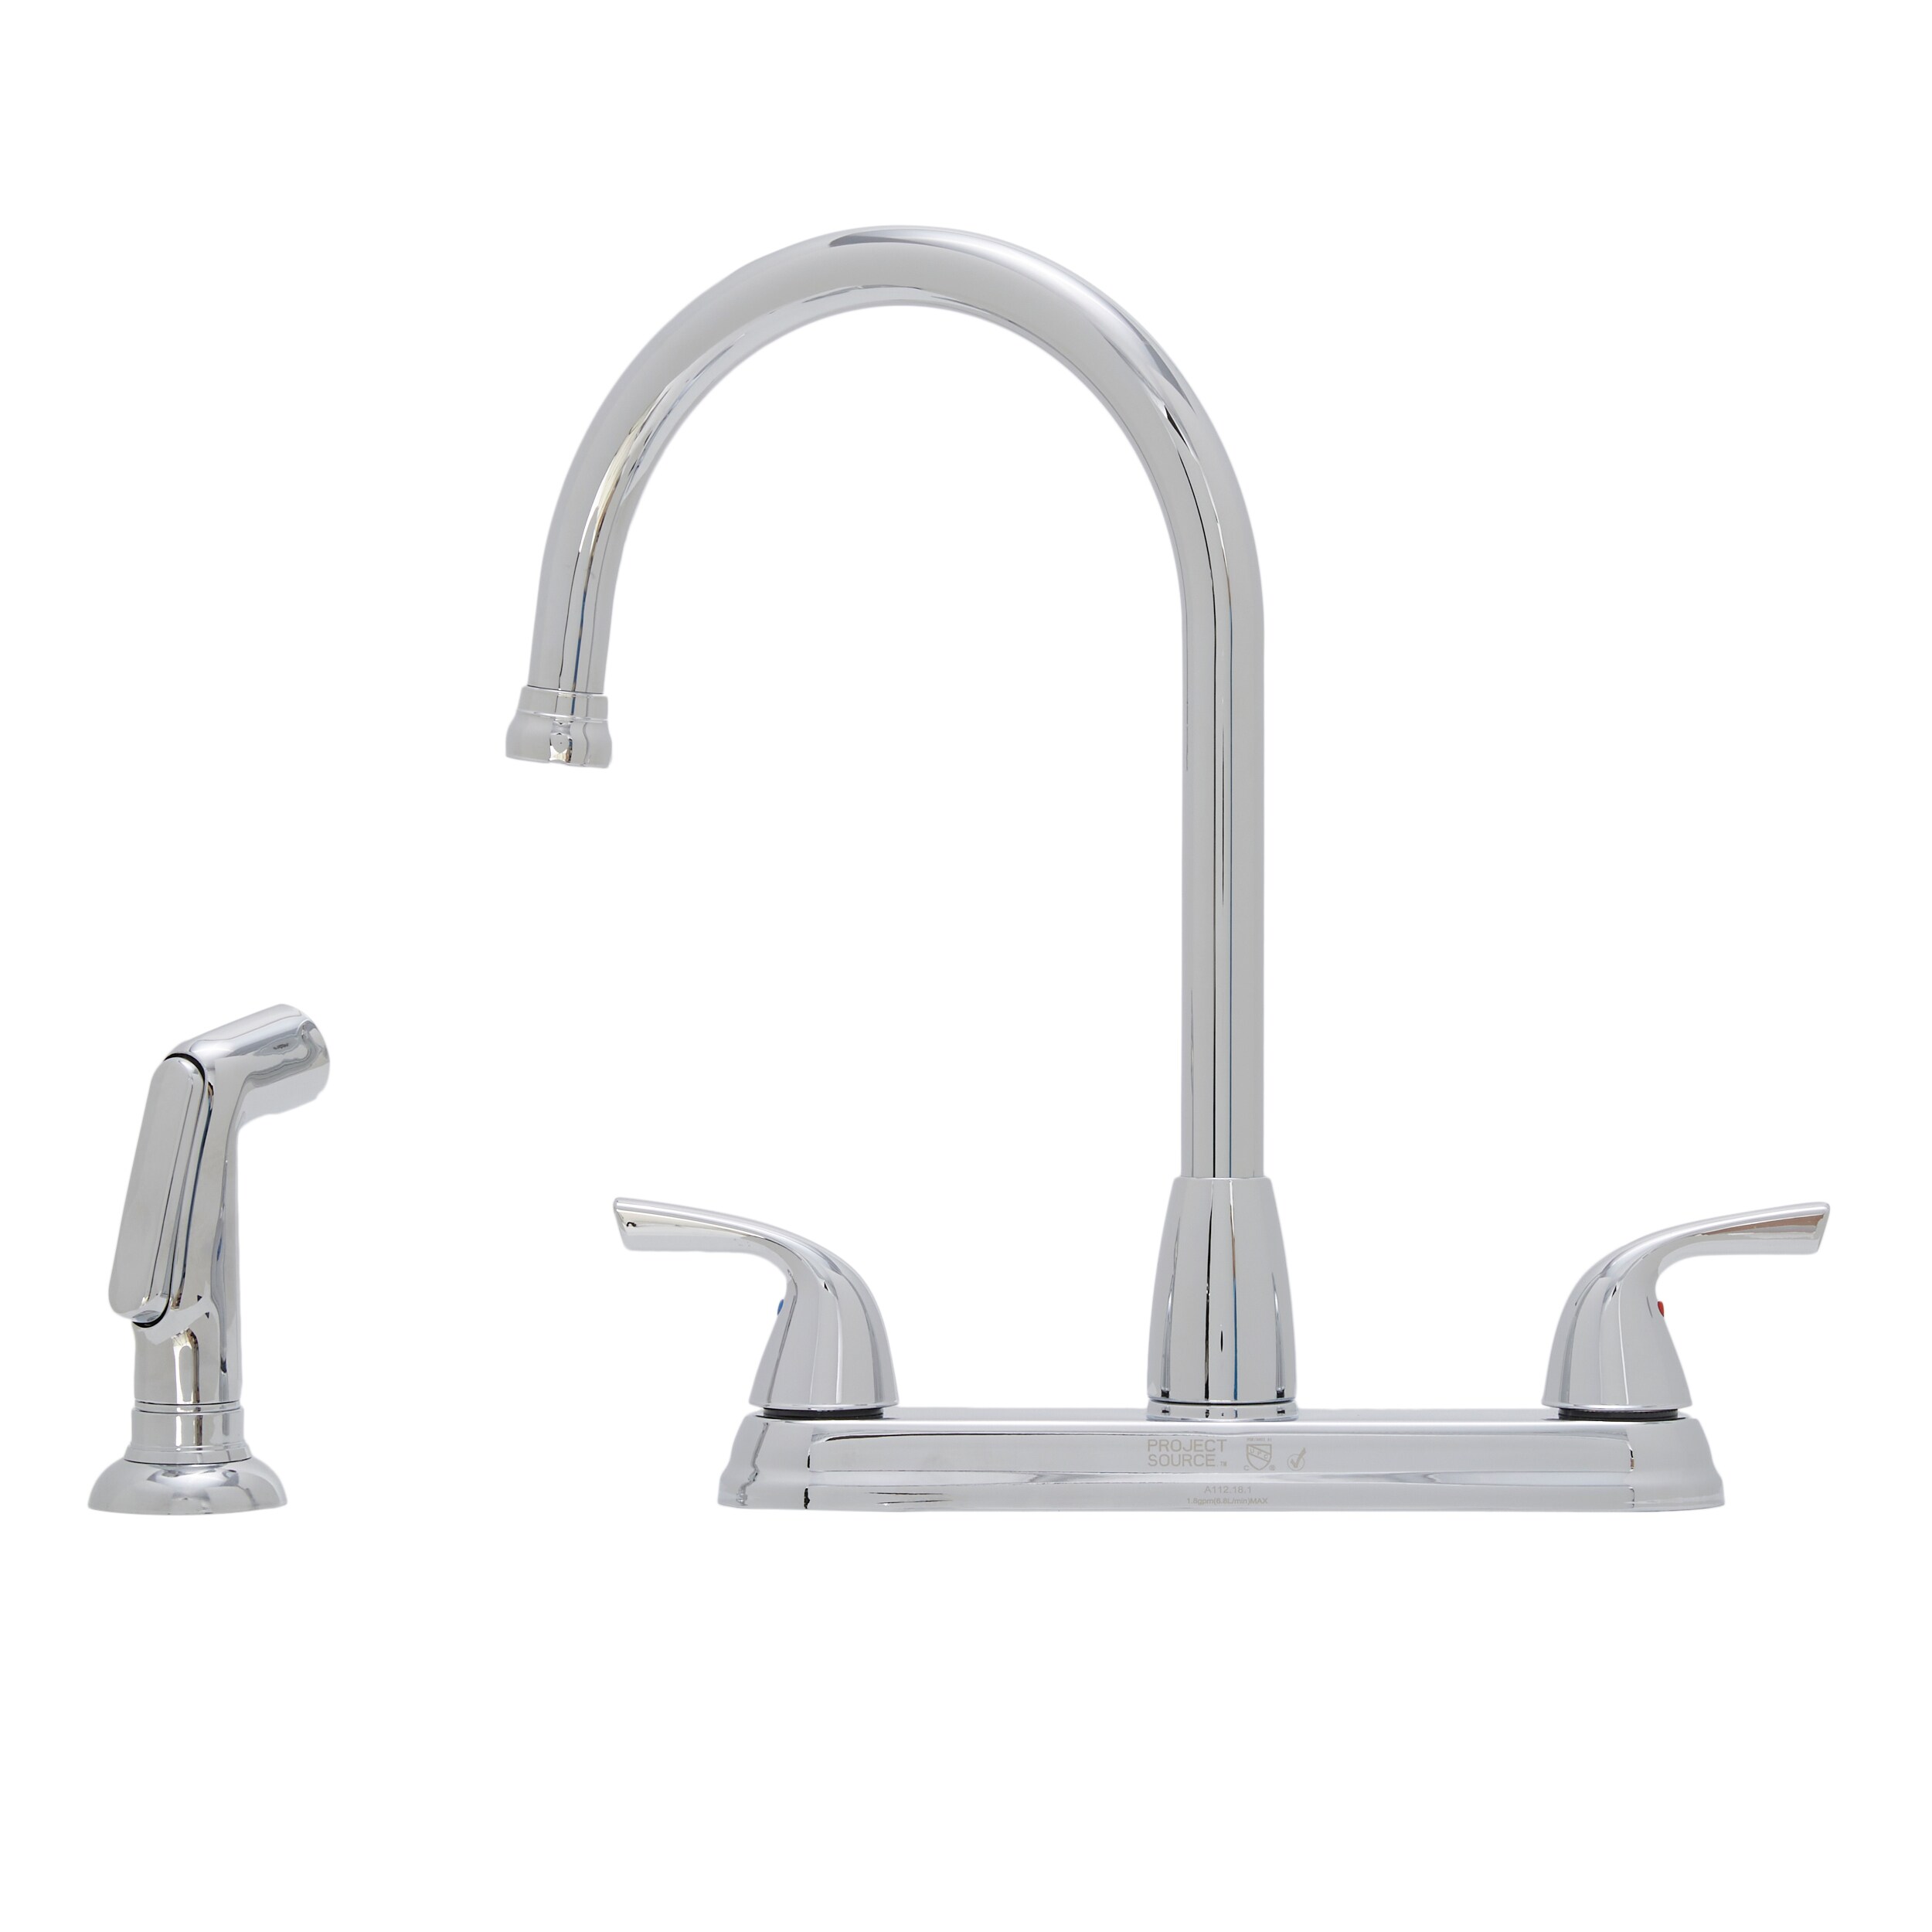 PEGLER PERFORMA Luxury Chrome Plated 1/2" Lever Handle Sink Taps ***2158QT*** 